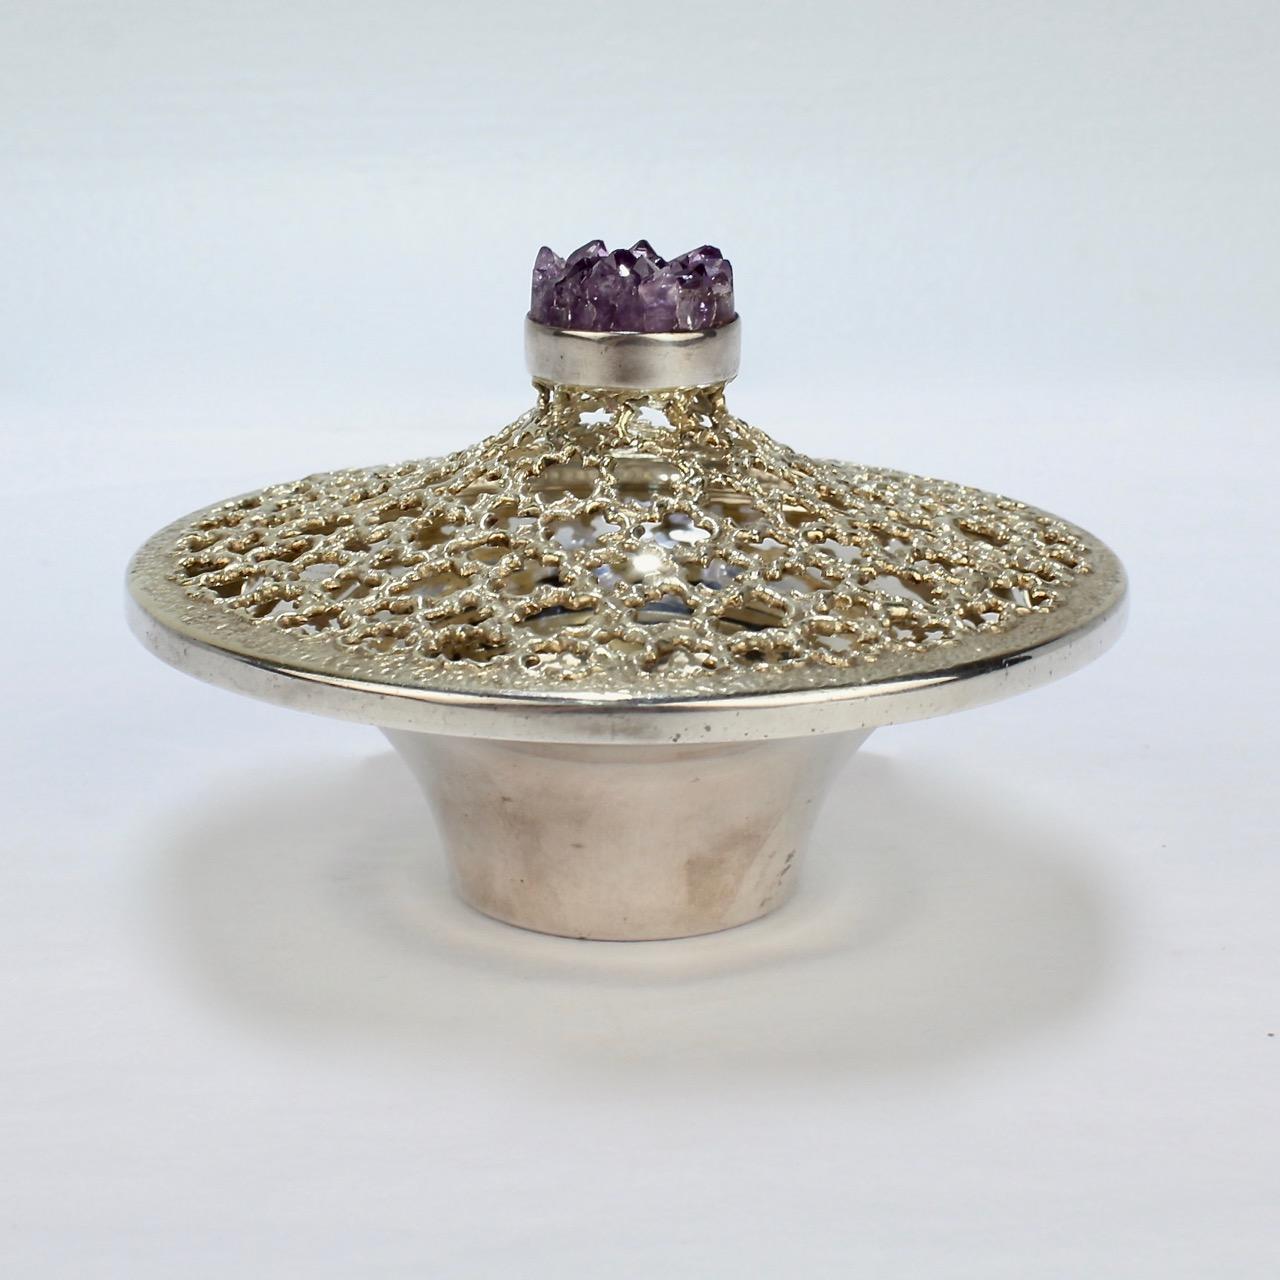 A wonderful Stuart Devlin covered posy bowl.

Comprised of sterling silver with a composite amethyst finial. 

The reticulated top is parcel gilt.

The base is marked for Stuart Devlin, London, 1978, and sterling.

Diameter: ca. 4 1/4 in.

Items